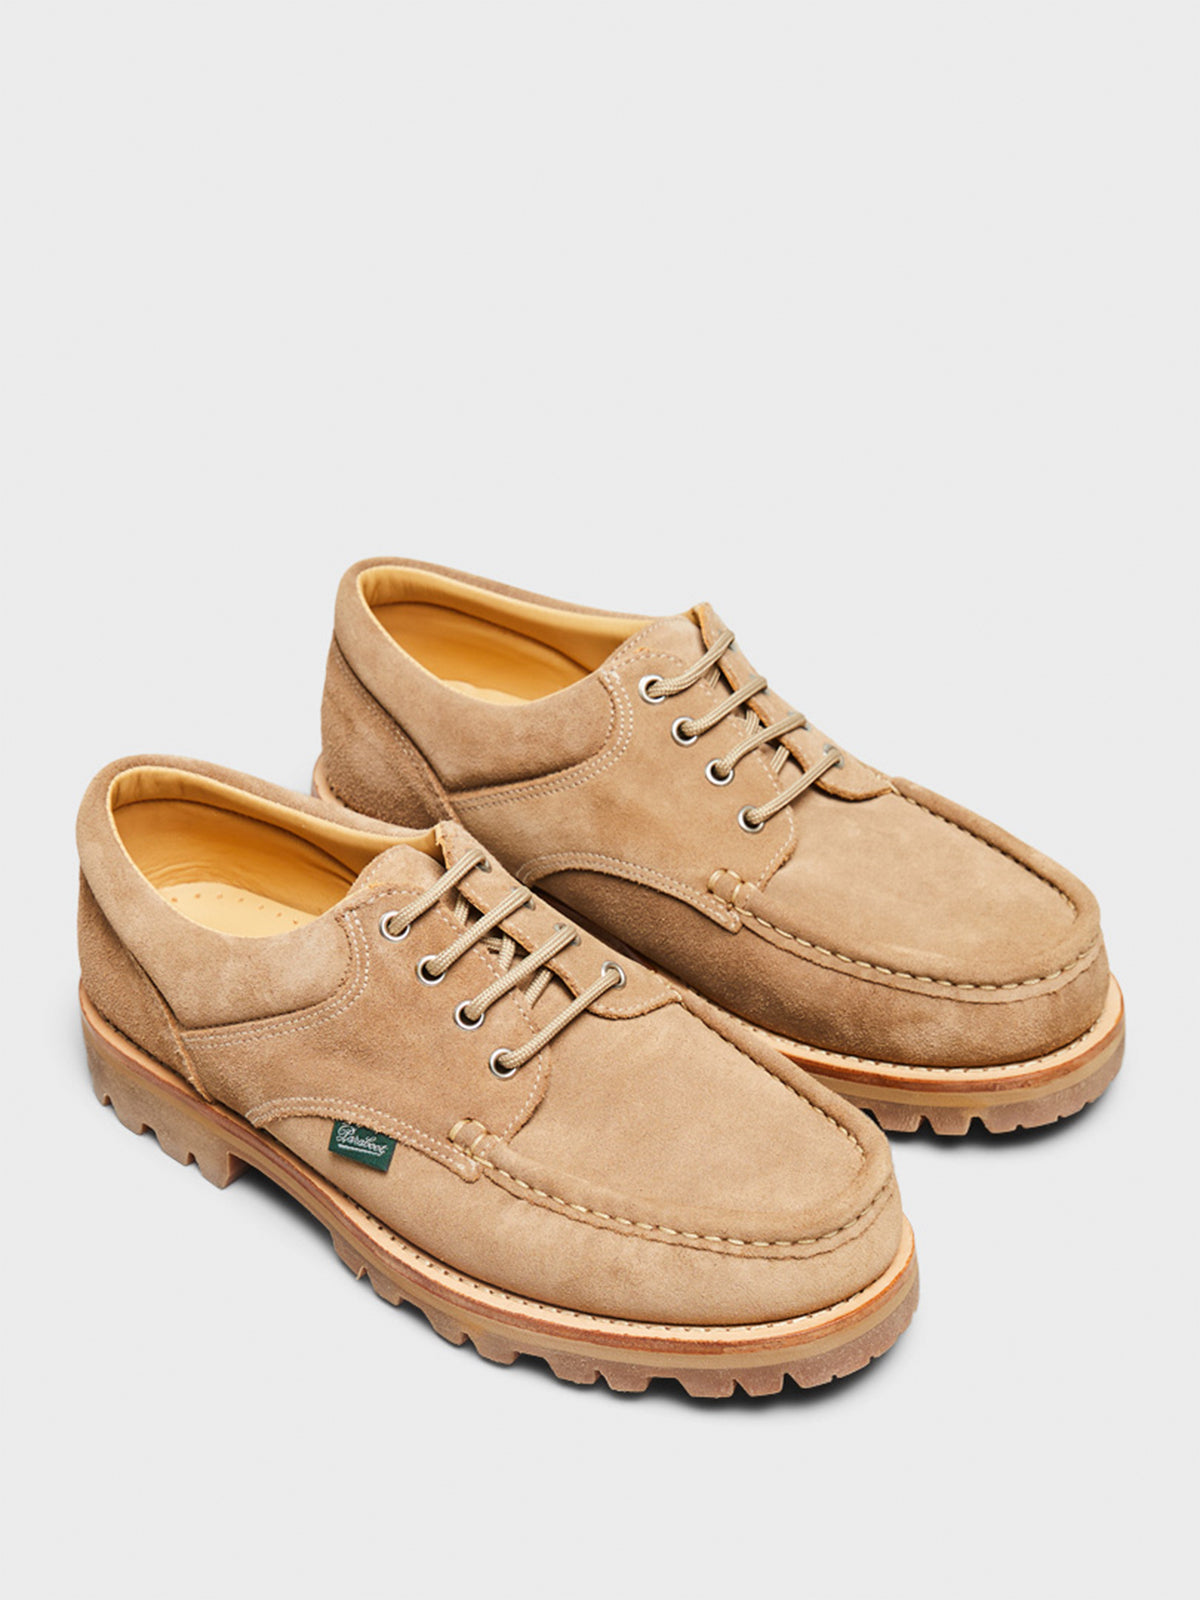 Thiers Shoes in Beige